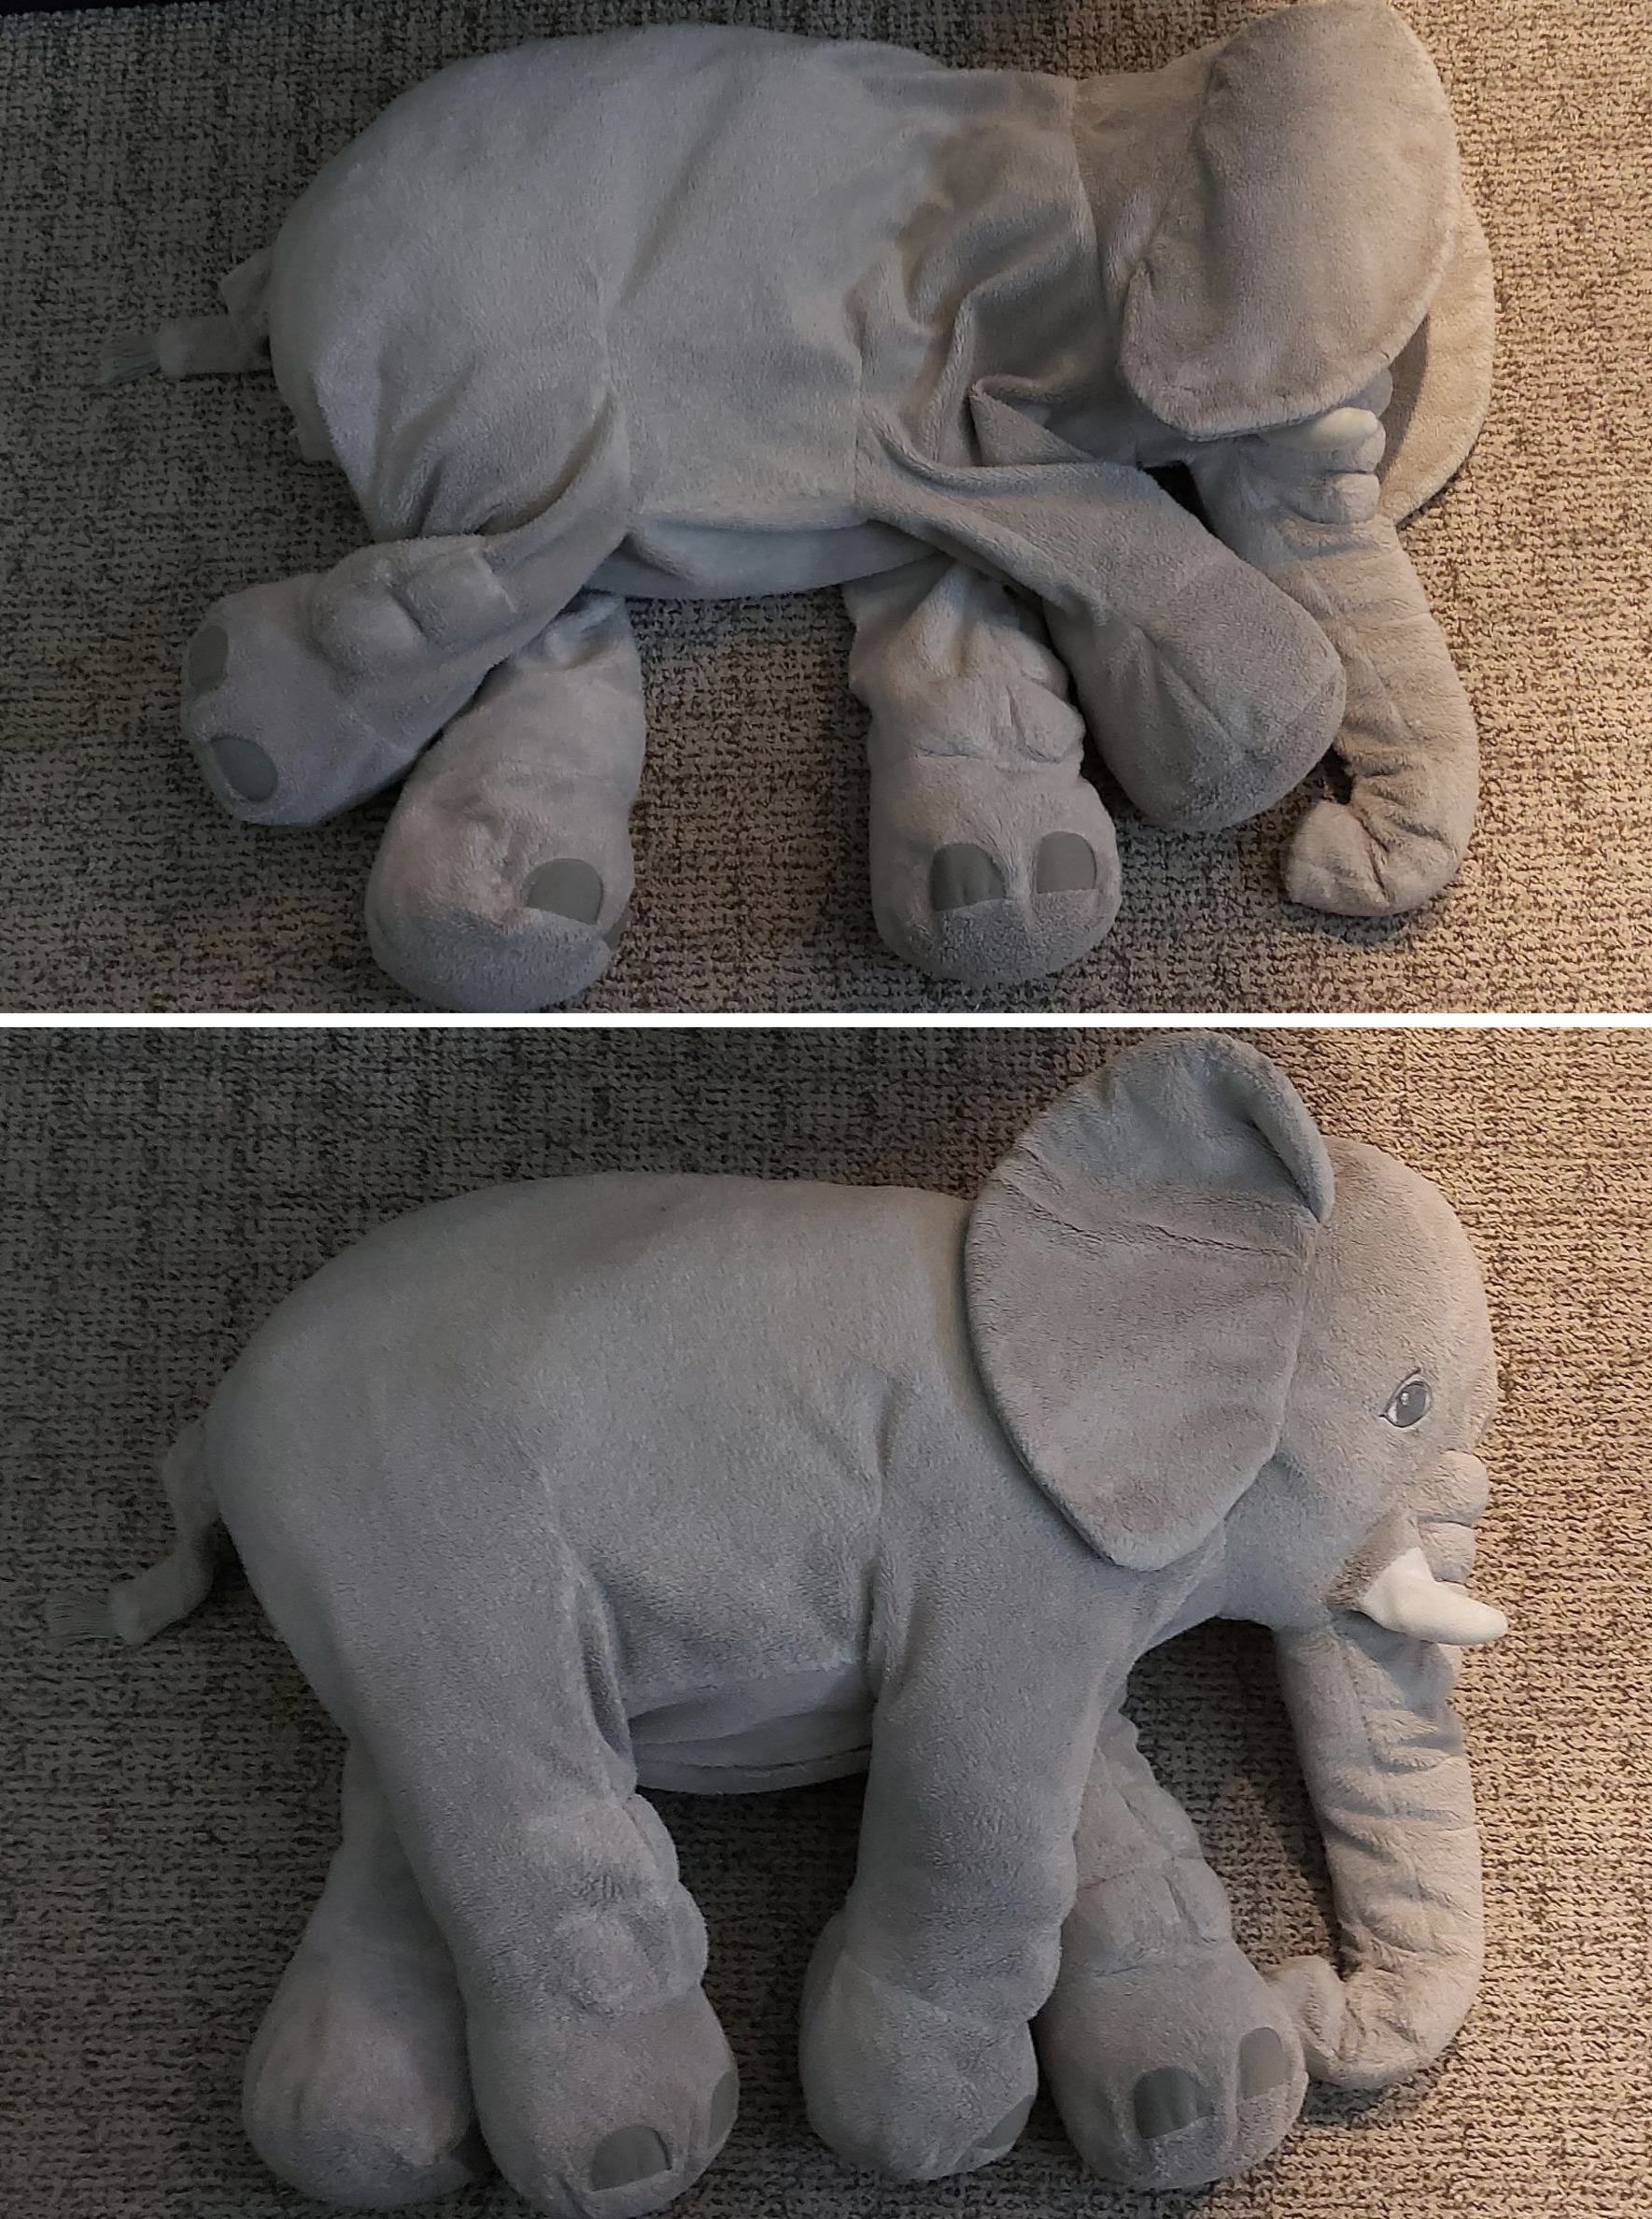 a stuffed elephant toy before, looking deflated, and after, looking fuller and revivied